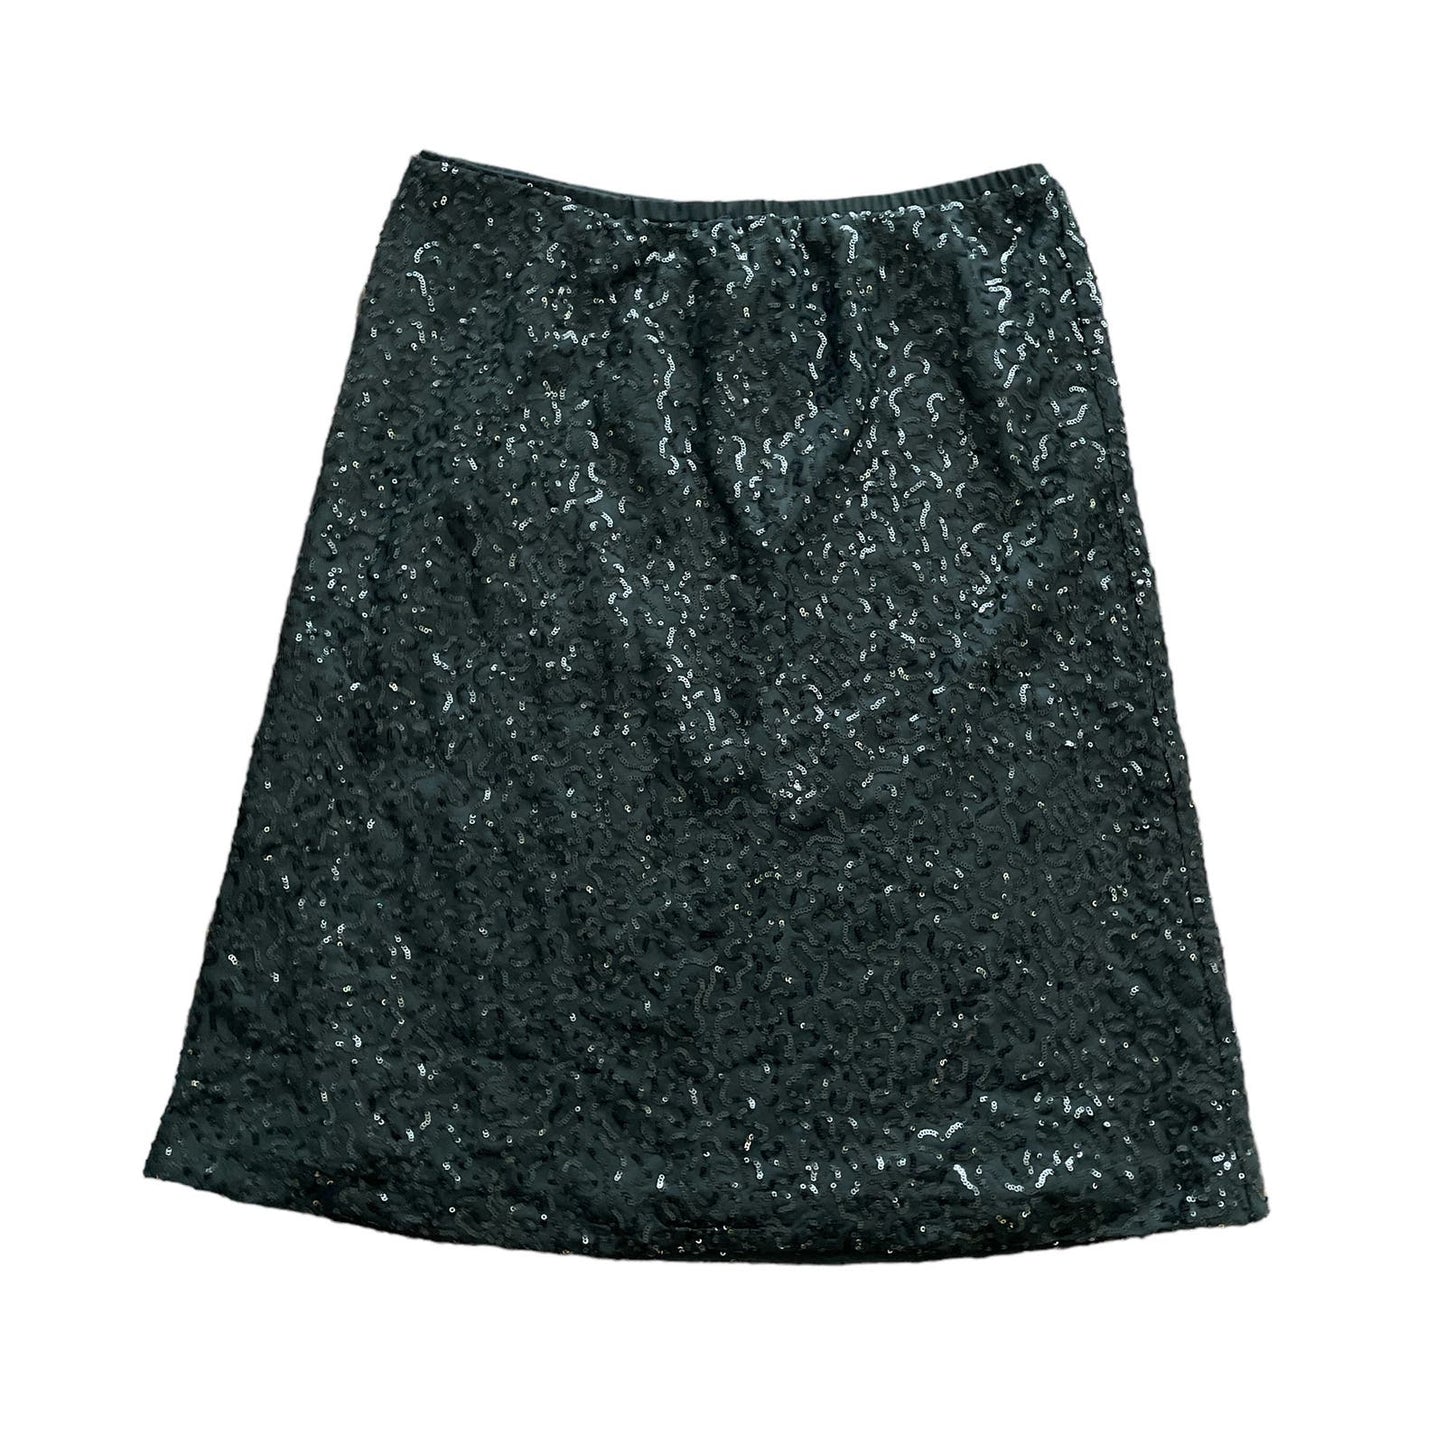 90s Black Sequined Party Skirt 8